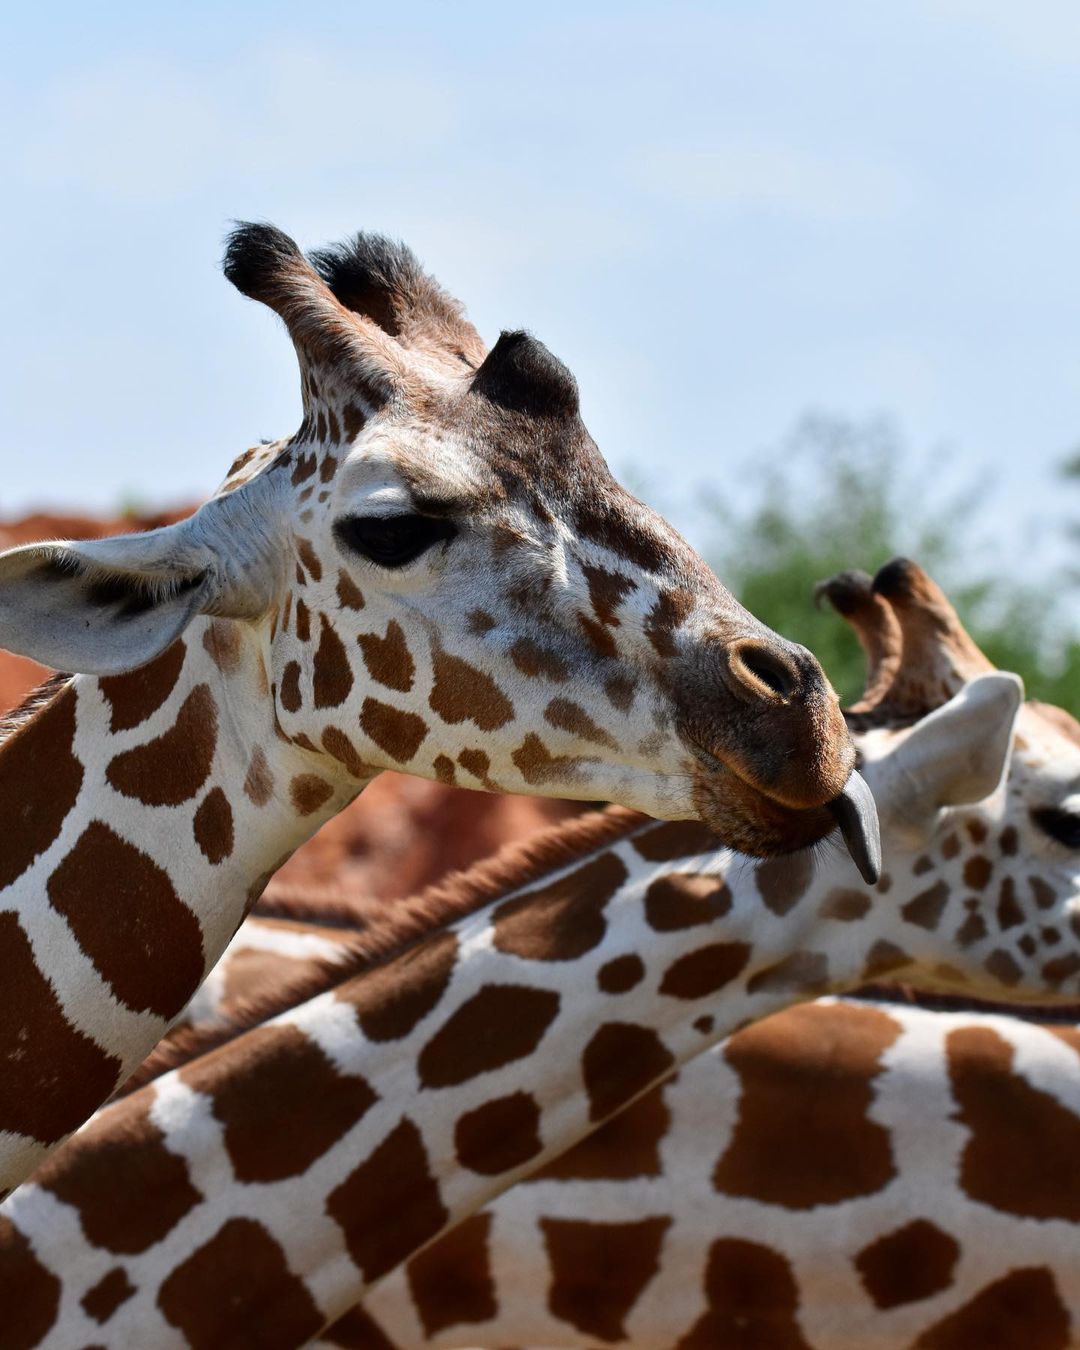 A giraffe sticks out its tongue. Photo by Instagram user @nicolewithnature.